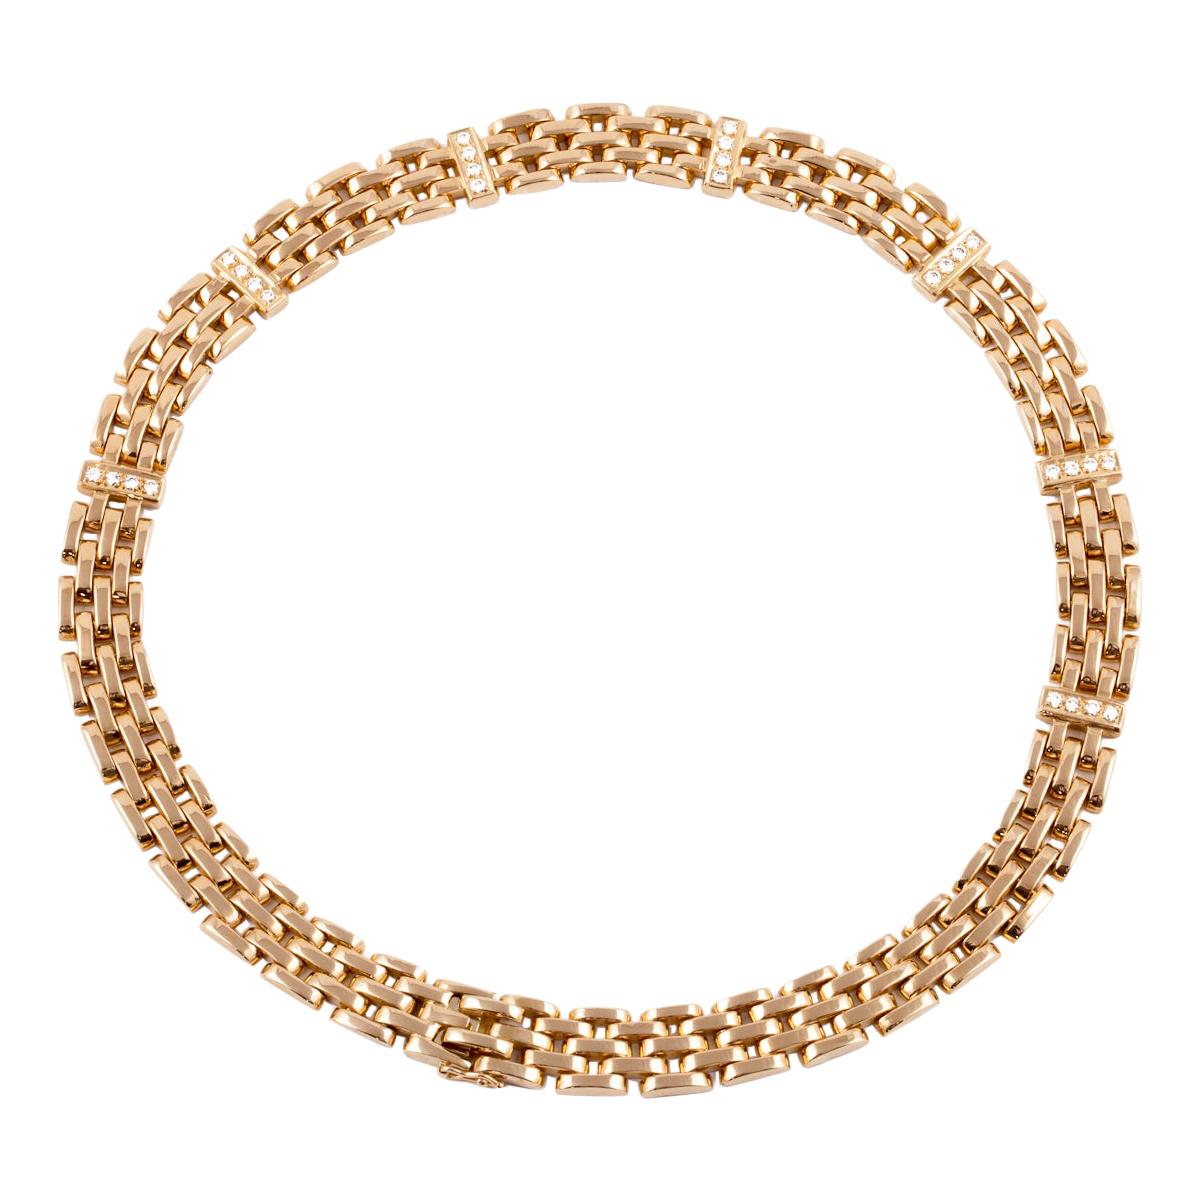 Panther Link Style Necklace with Diamonds in 18K Gold